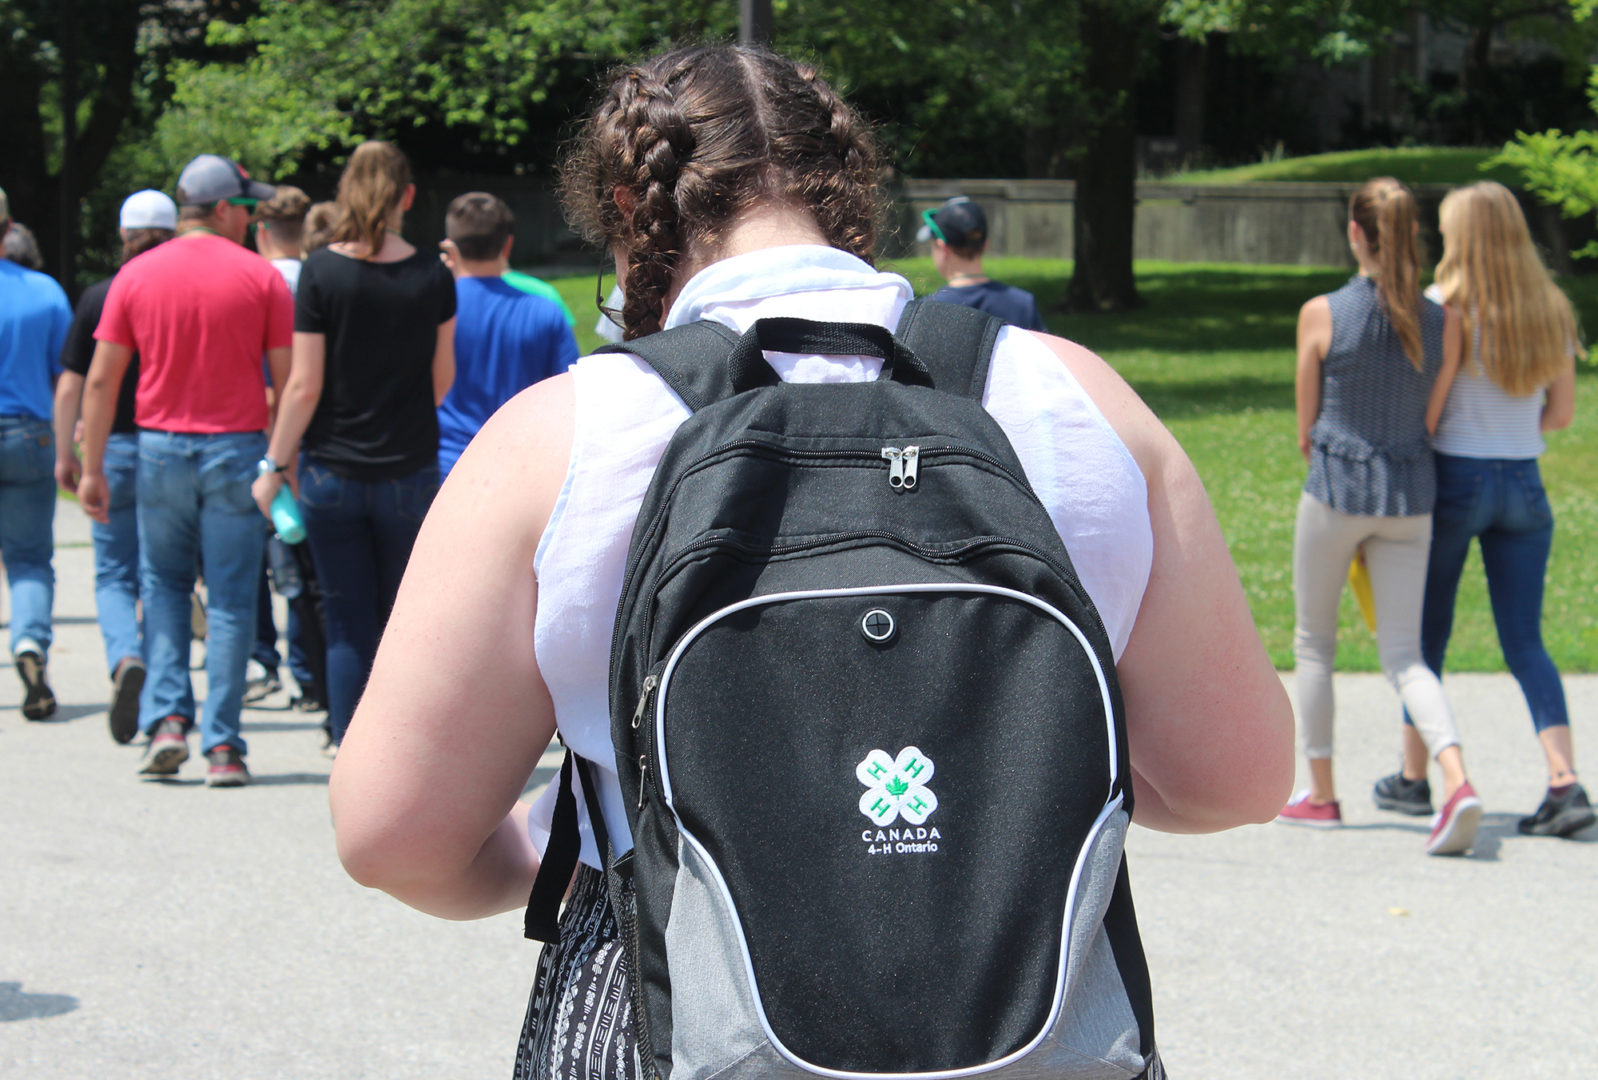 Youth walking away in group wearing 4-H back pack on sunny day